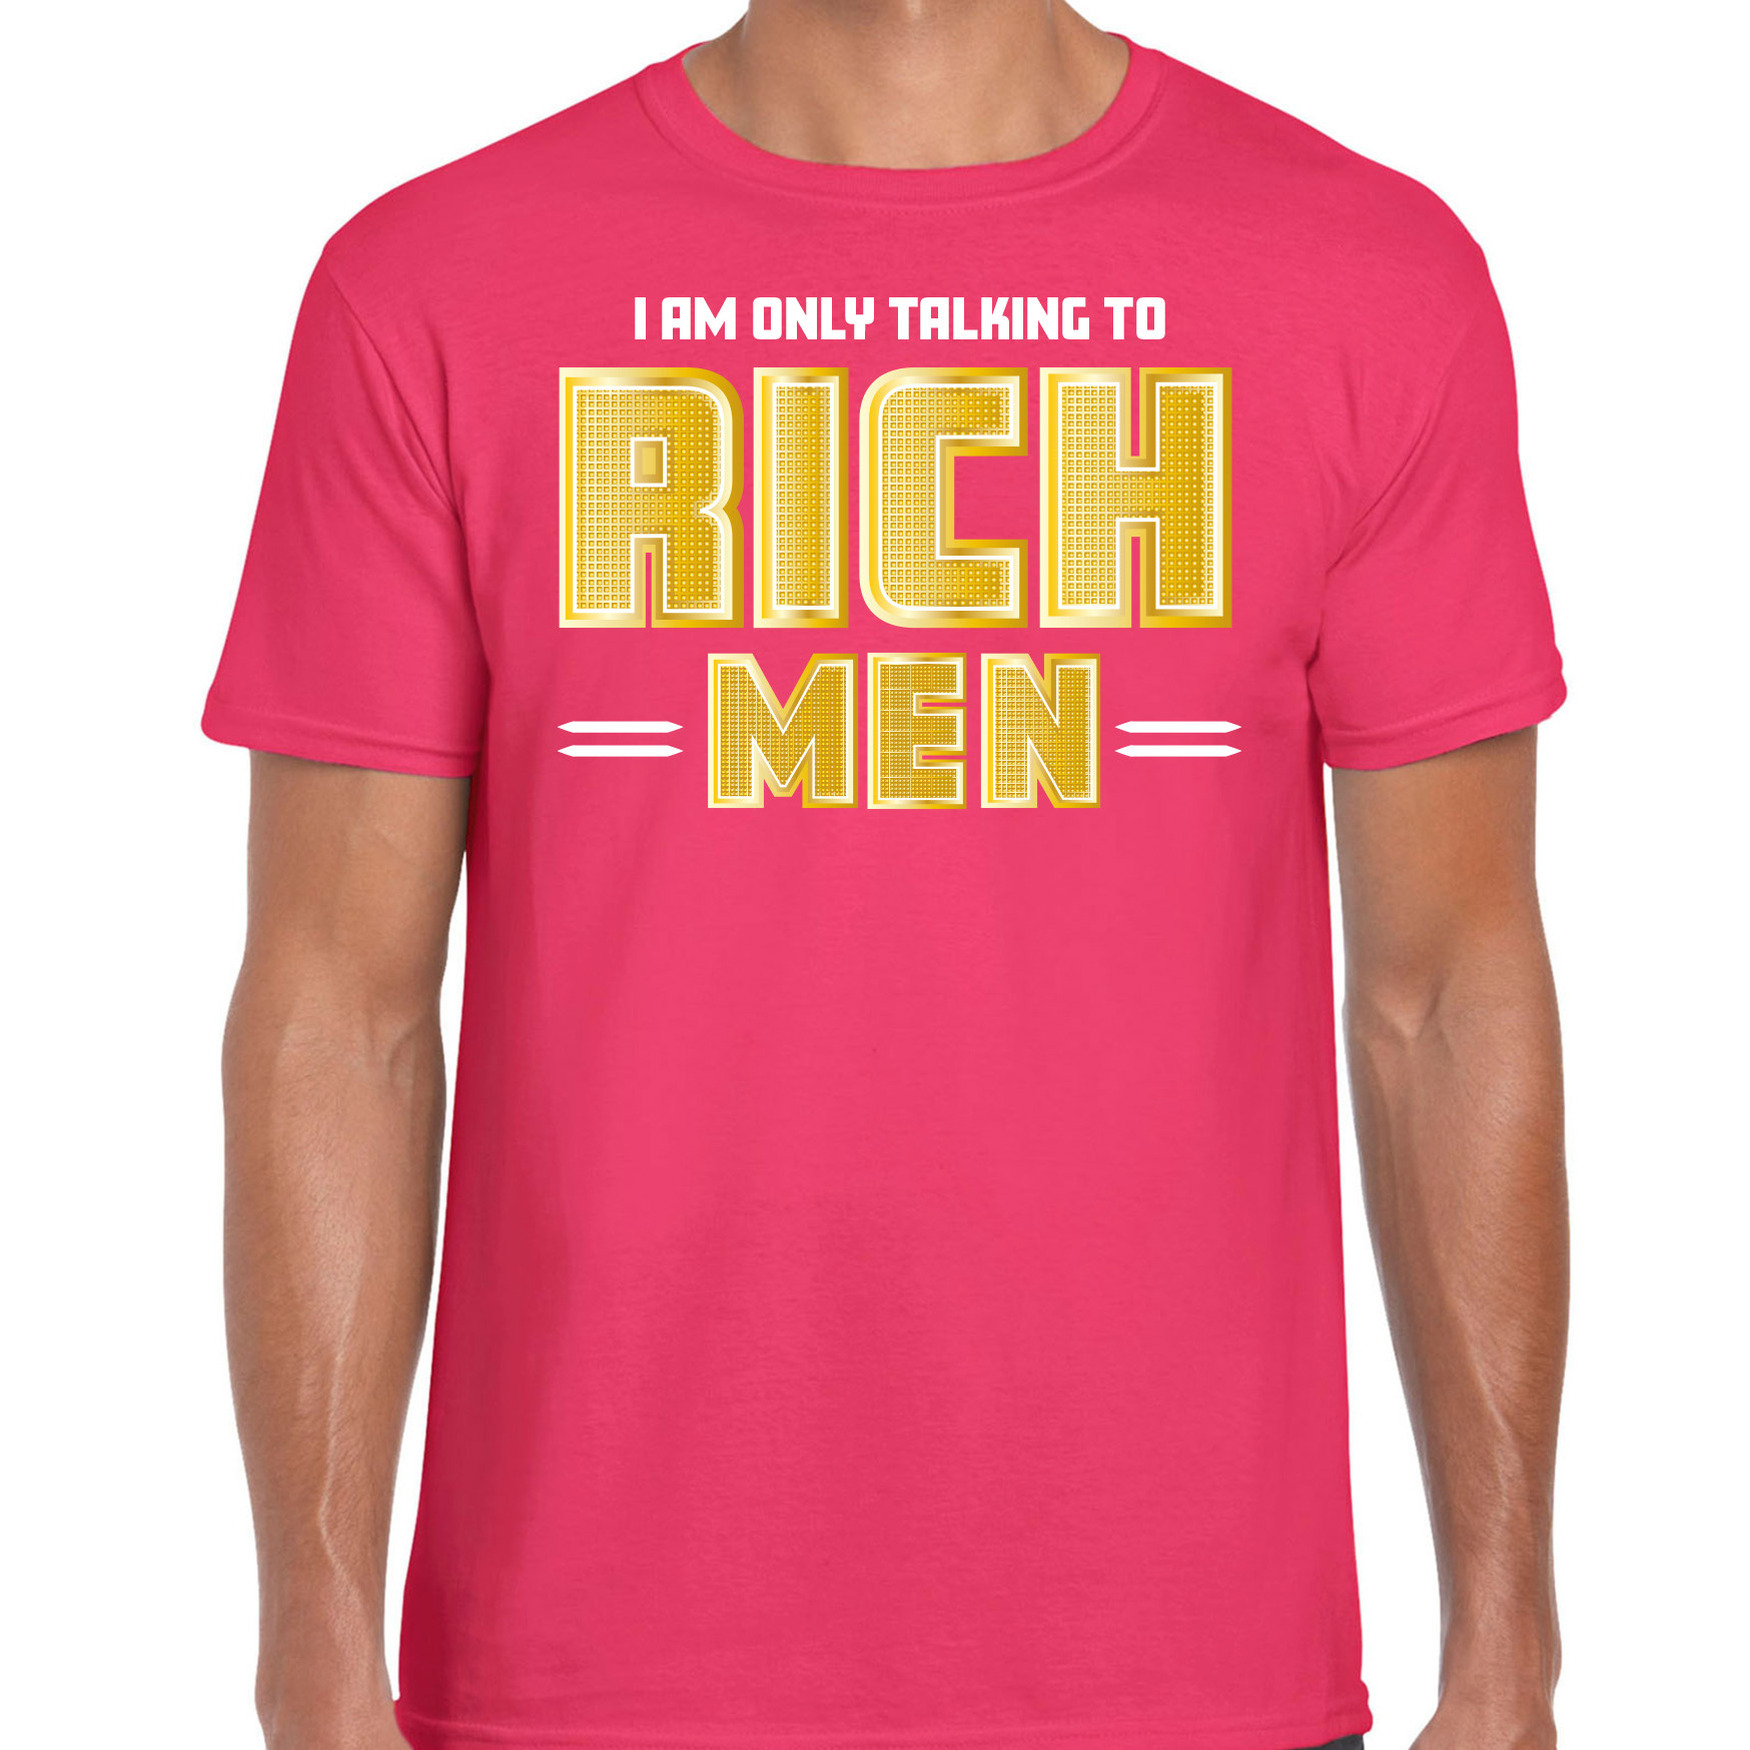 Foute party t-shirt voor heren Gold digger roze carnaval-themafeest